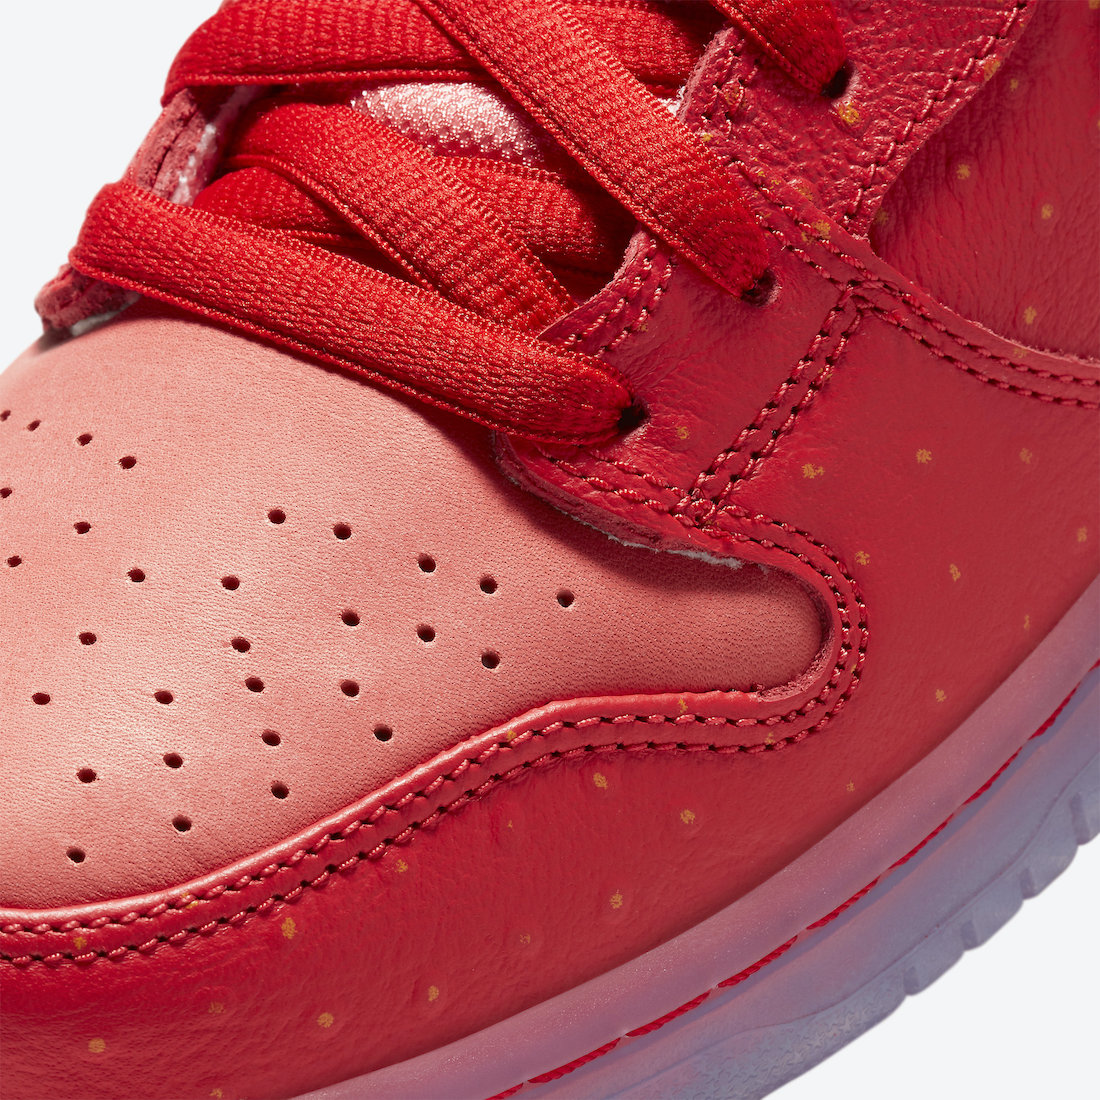 Nike-SB-Dunk-High-Strawberry-Cough-CW7093-600-Release-Date-Price-6